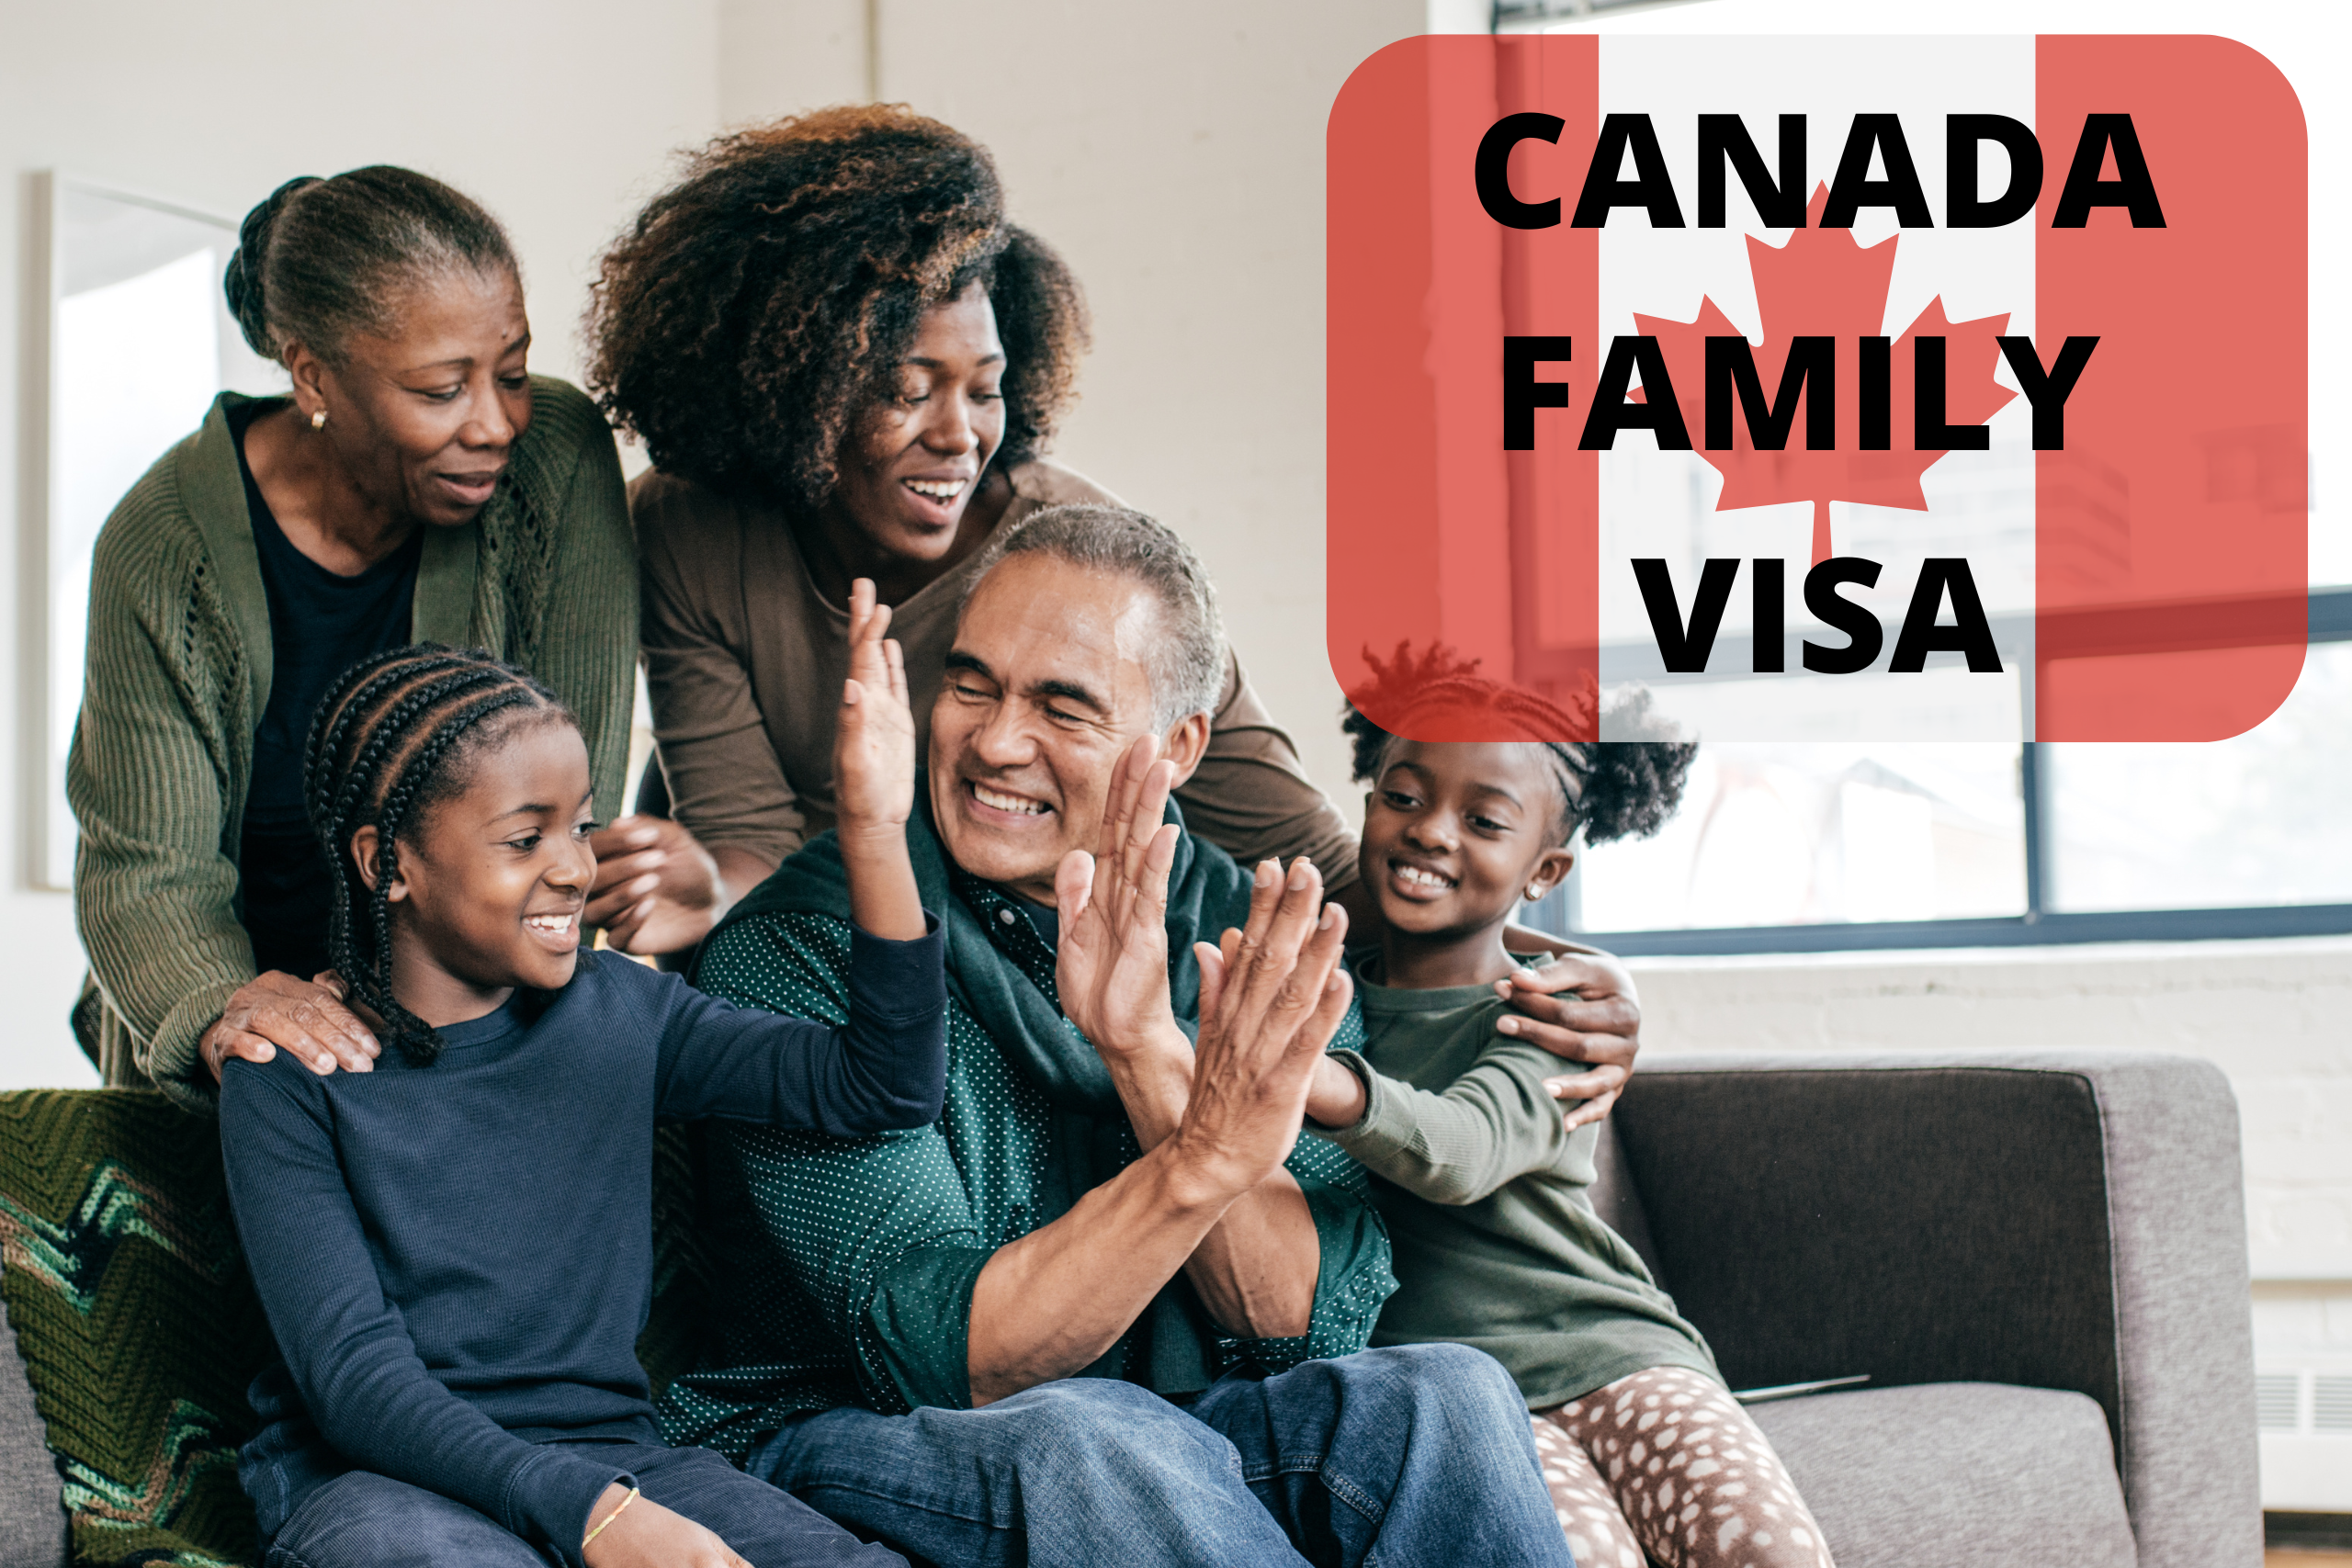 Canada family visa - a smiling family of 5. A grandmum, grandad 2 little girls and a young woman make up the family.